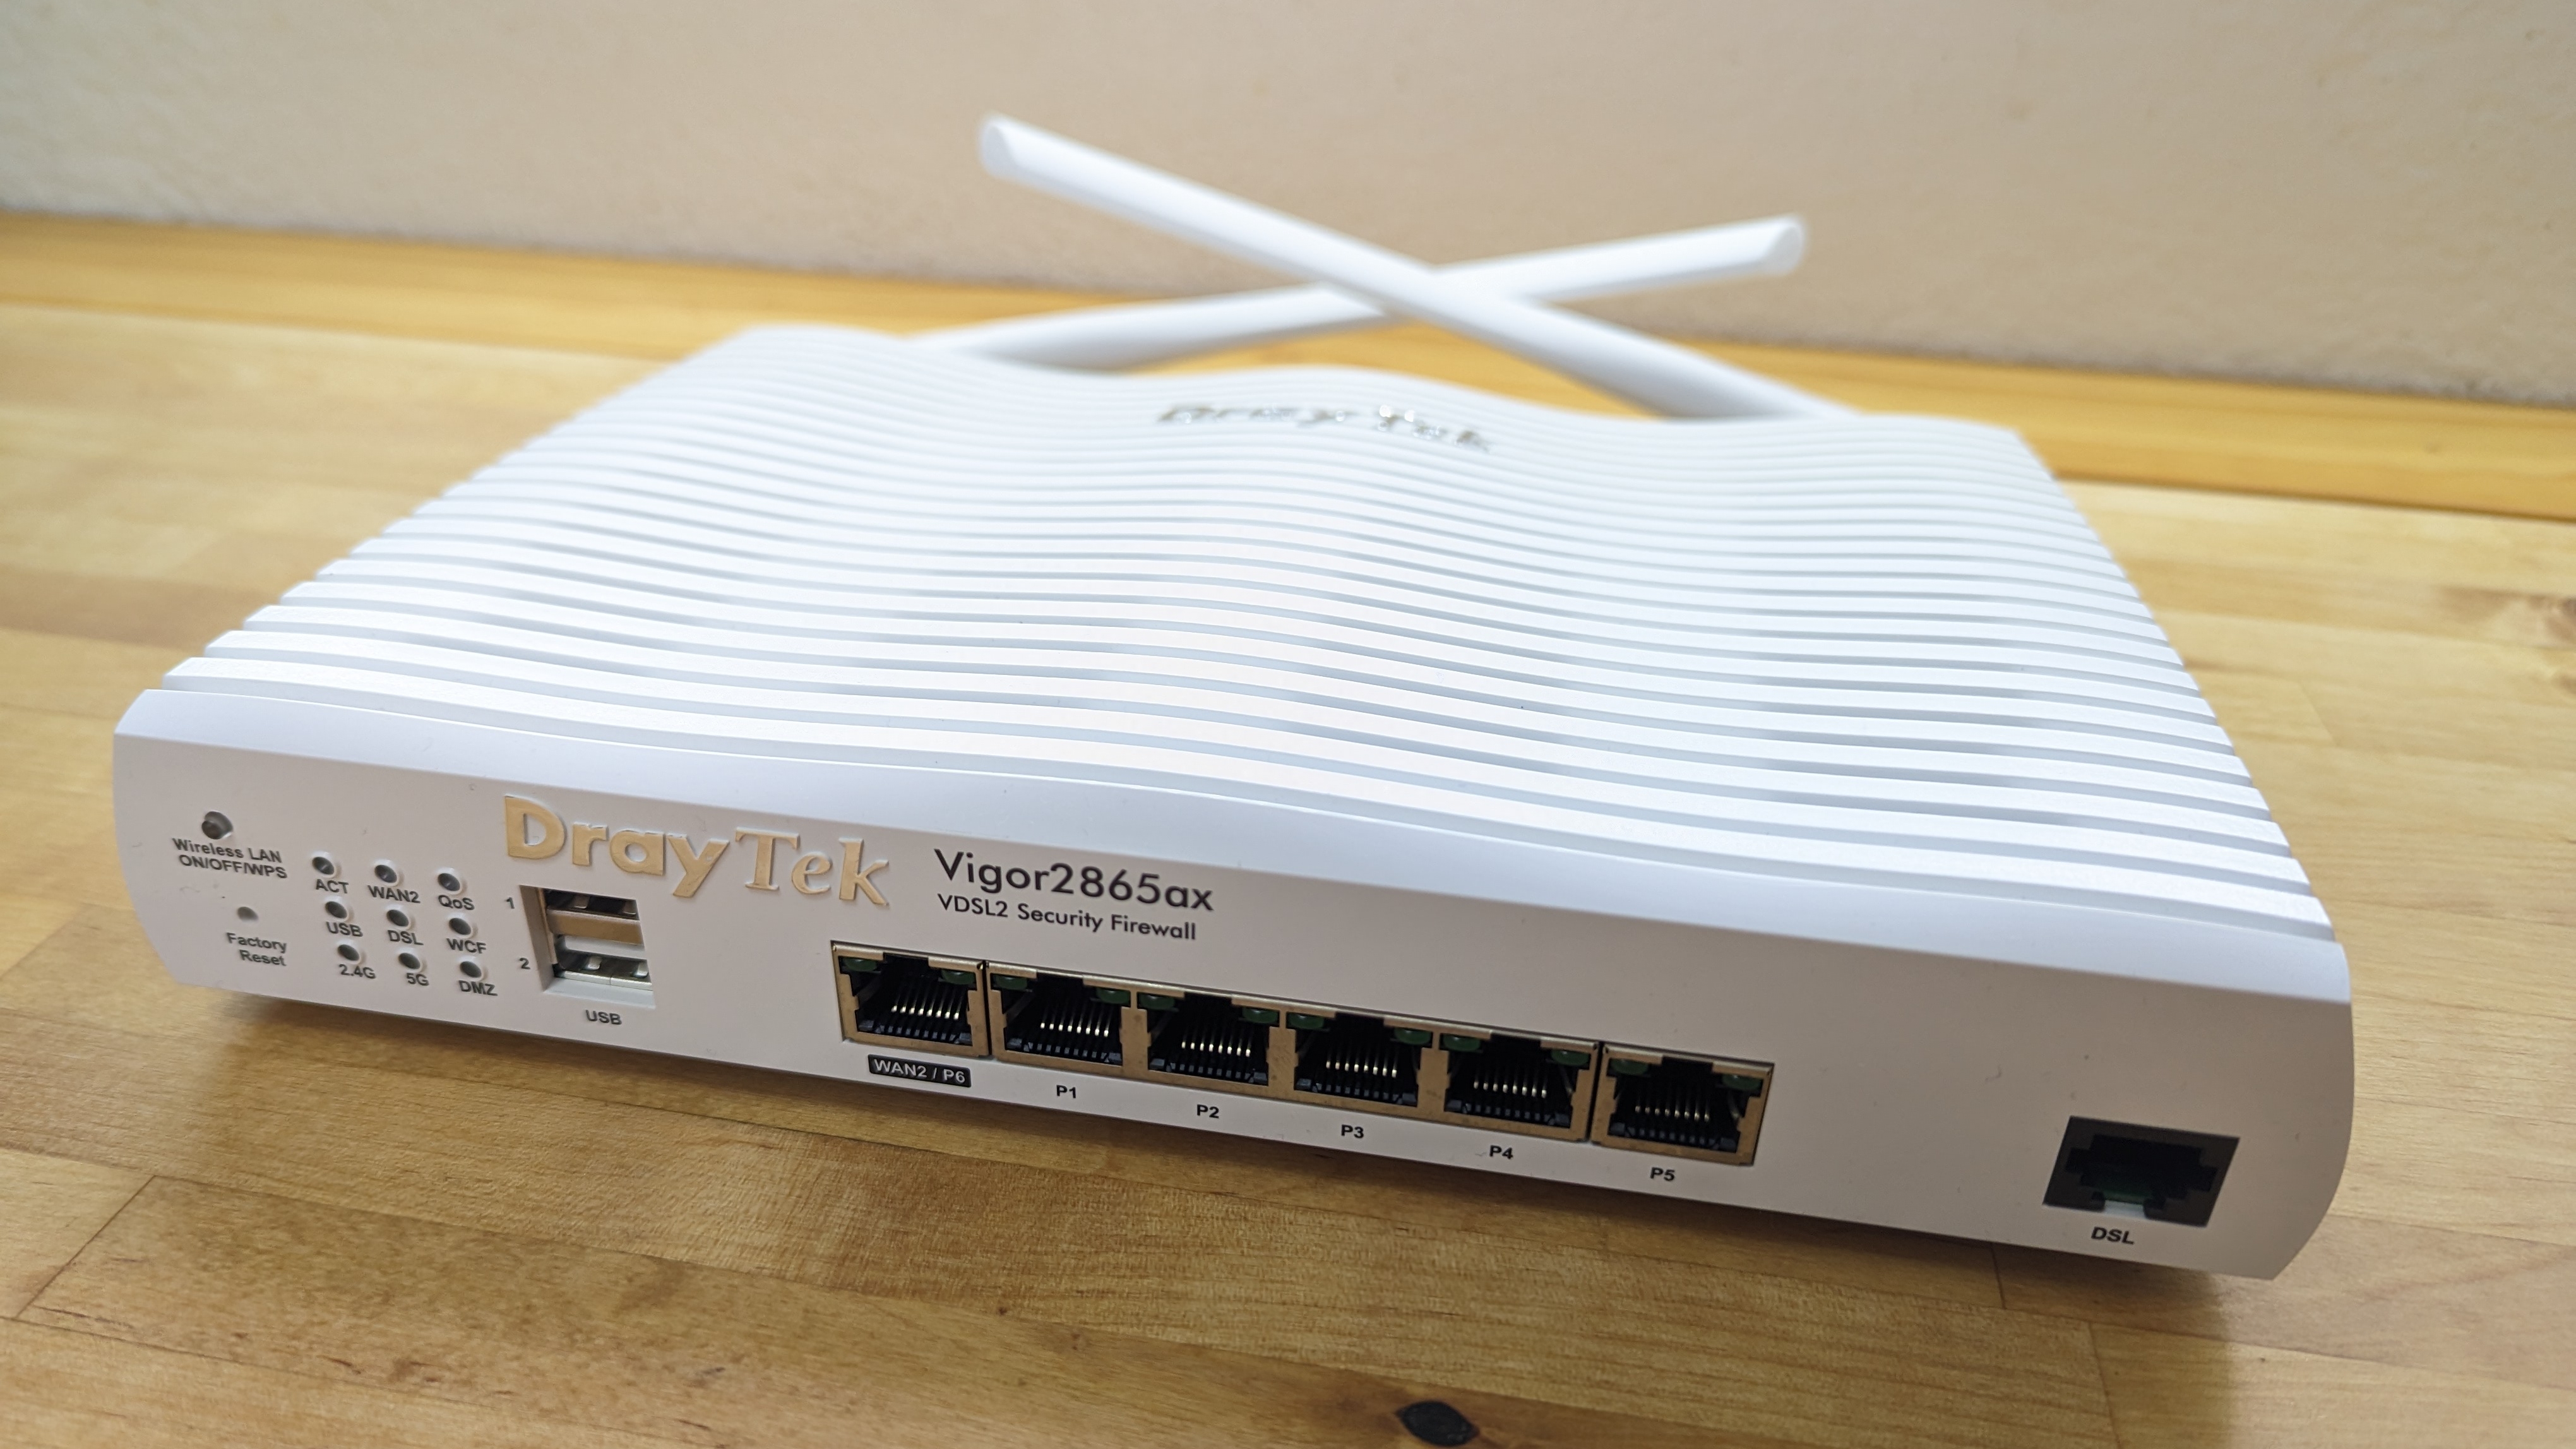 Front and top view of the DrayTek Vigor2865ax router